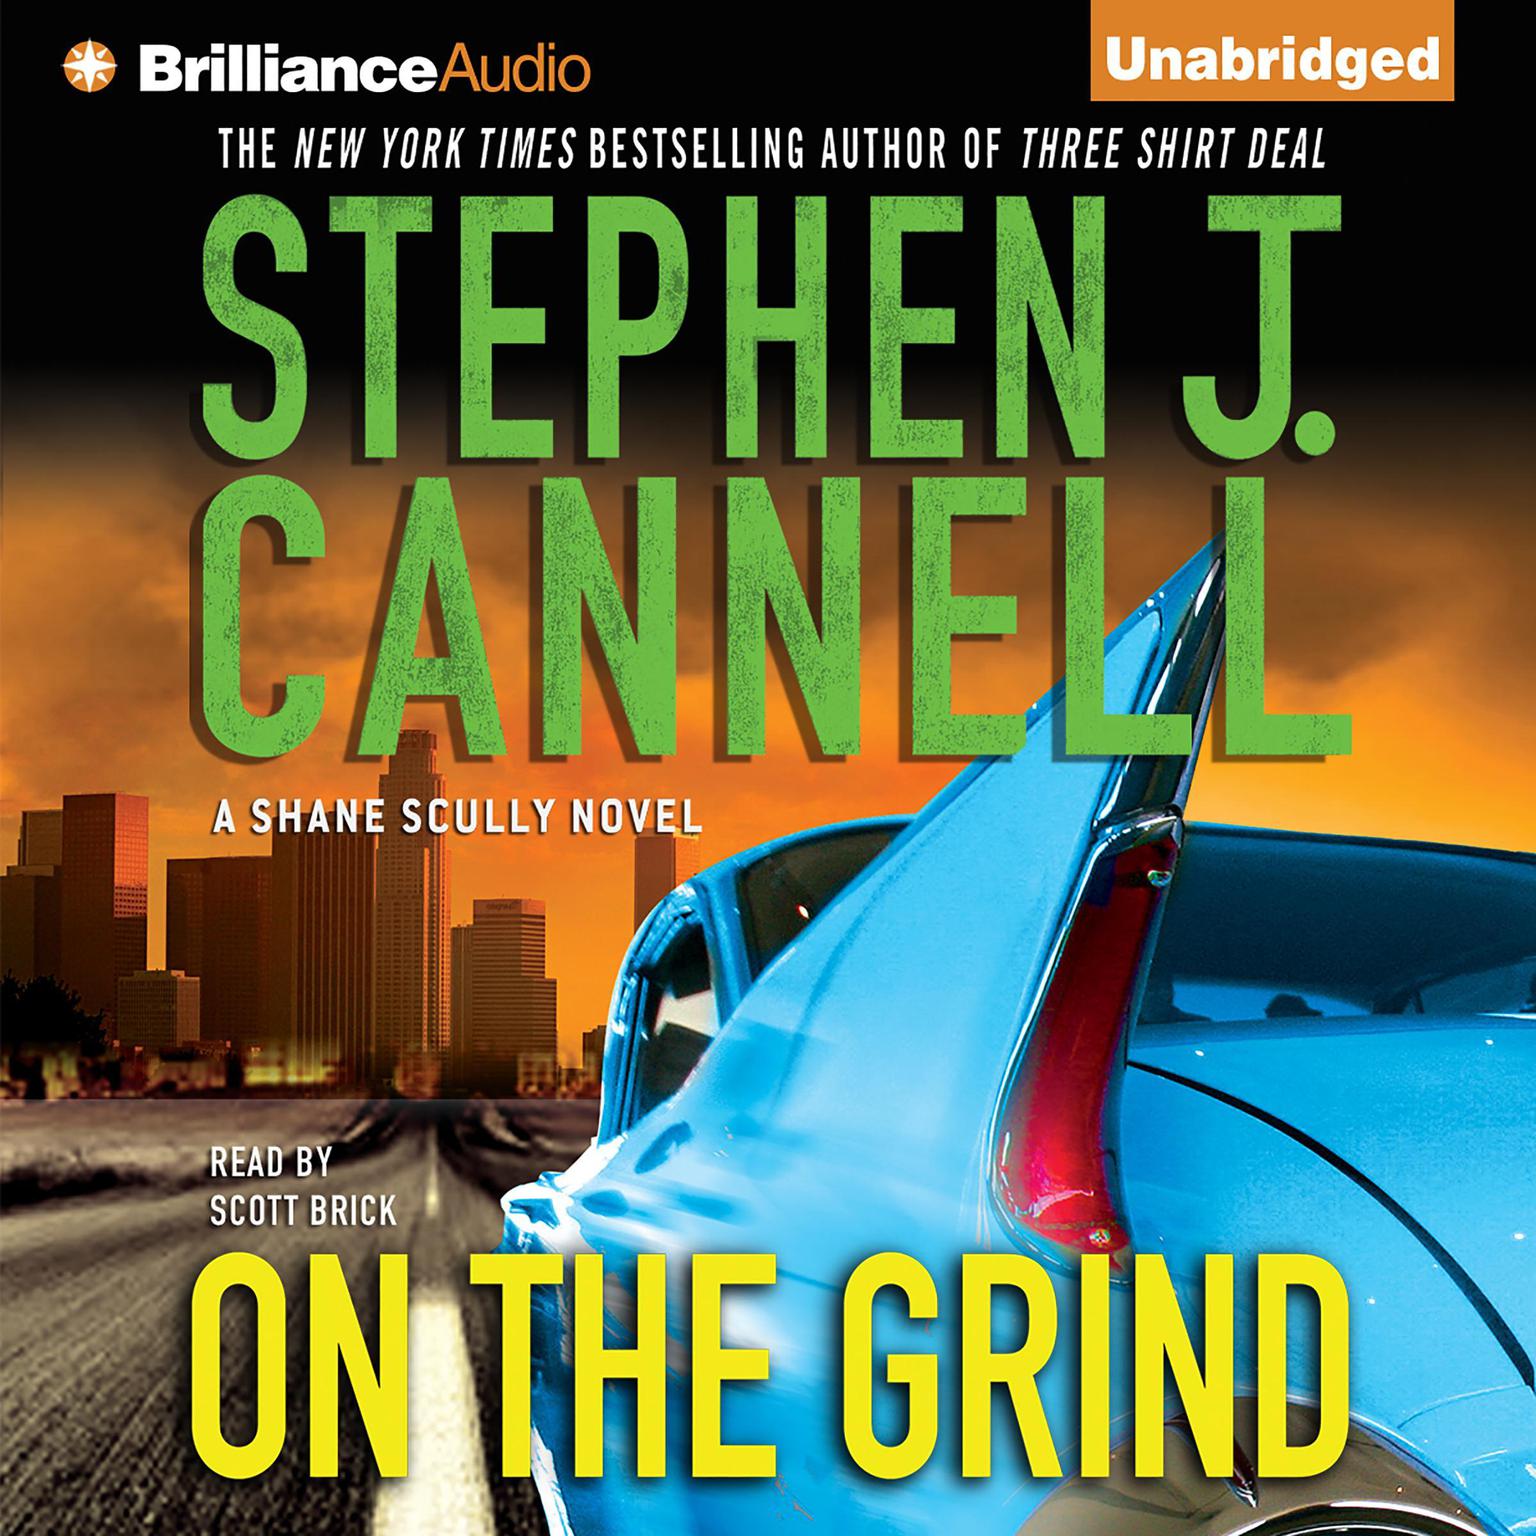 On the Grind Audiobook, by Stephen J. Cannell